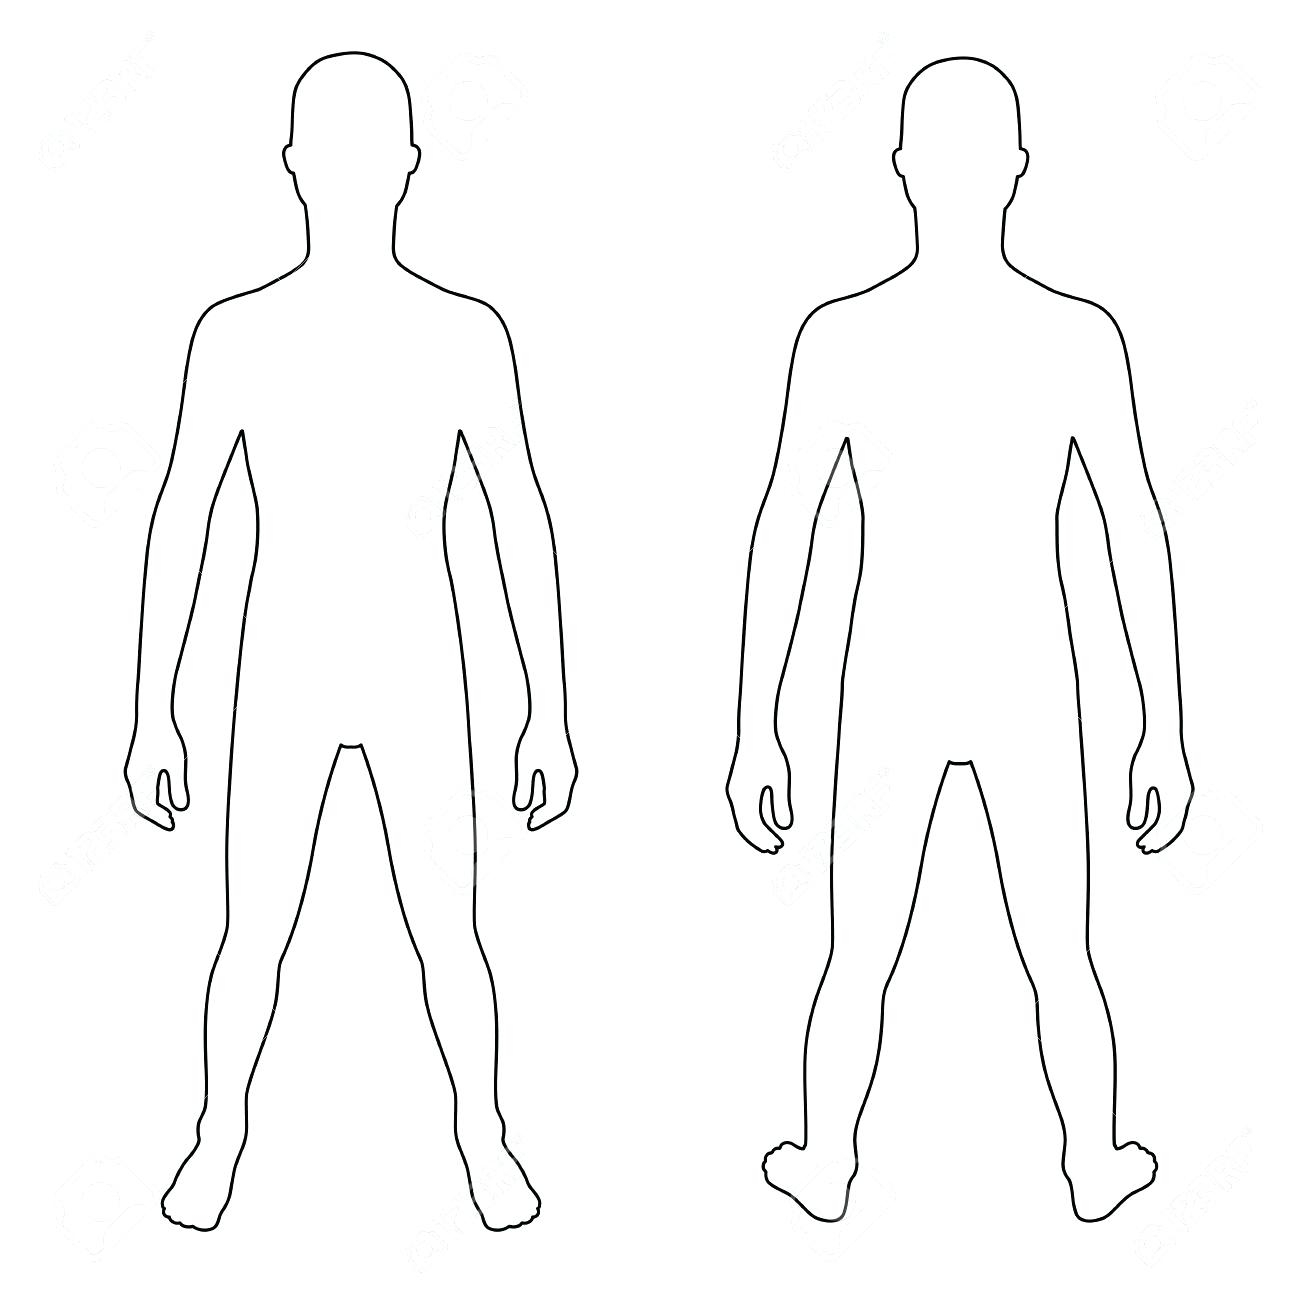 12-human-body-outline-templates-in-word-pdf-doc-formats